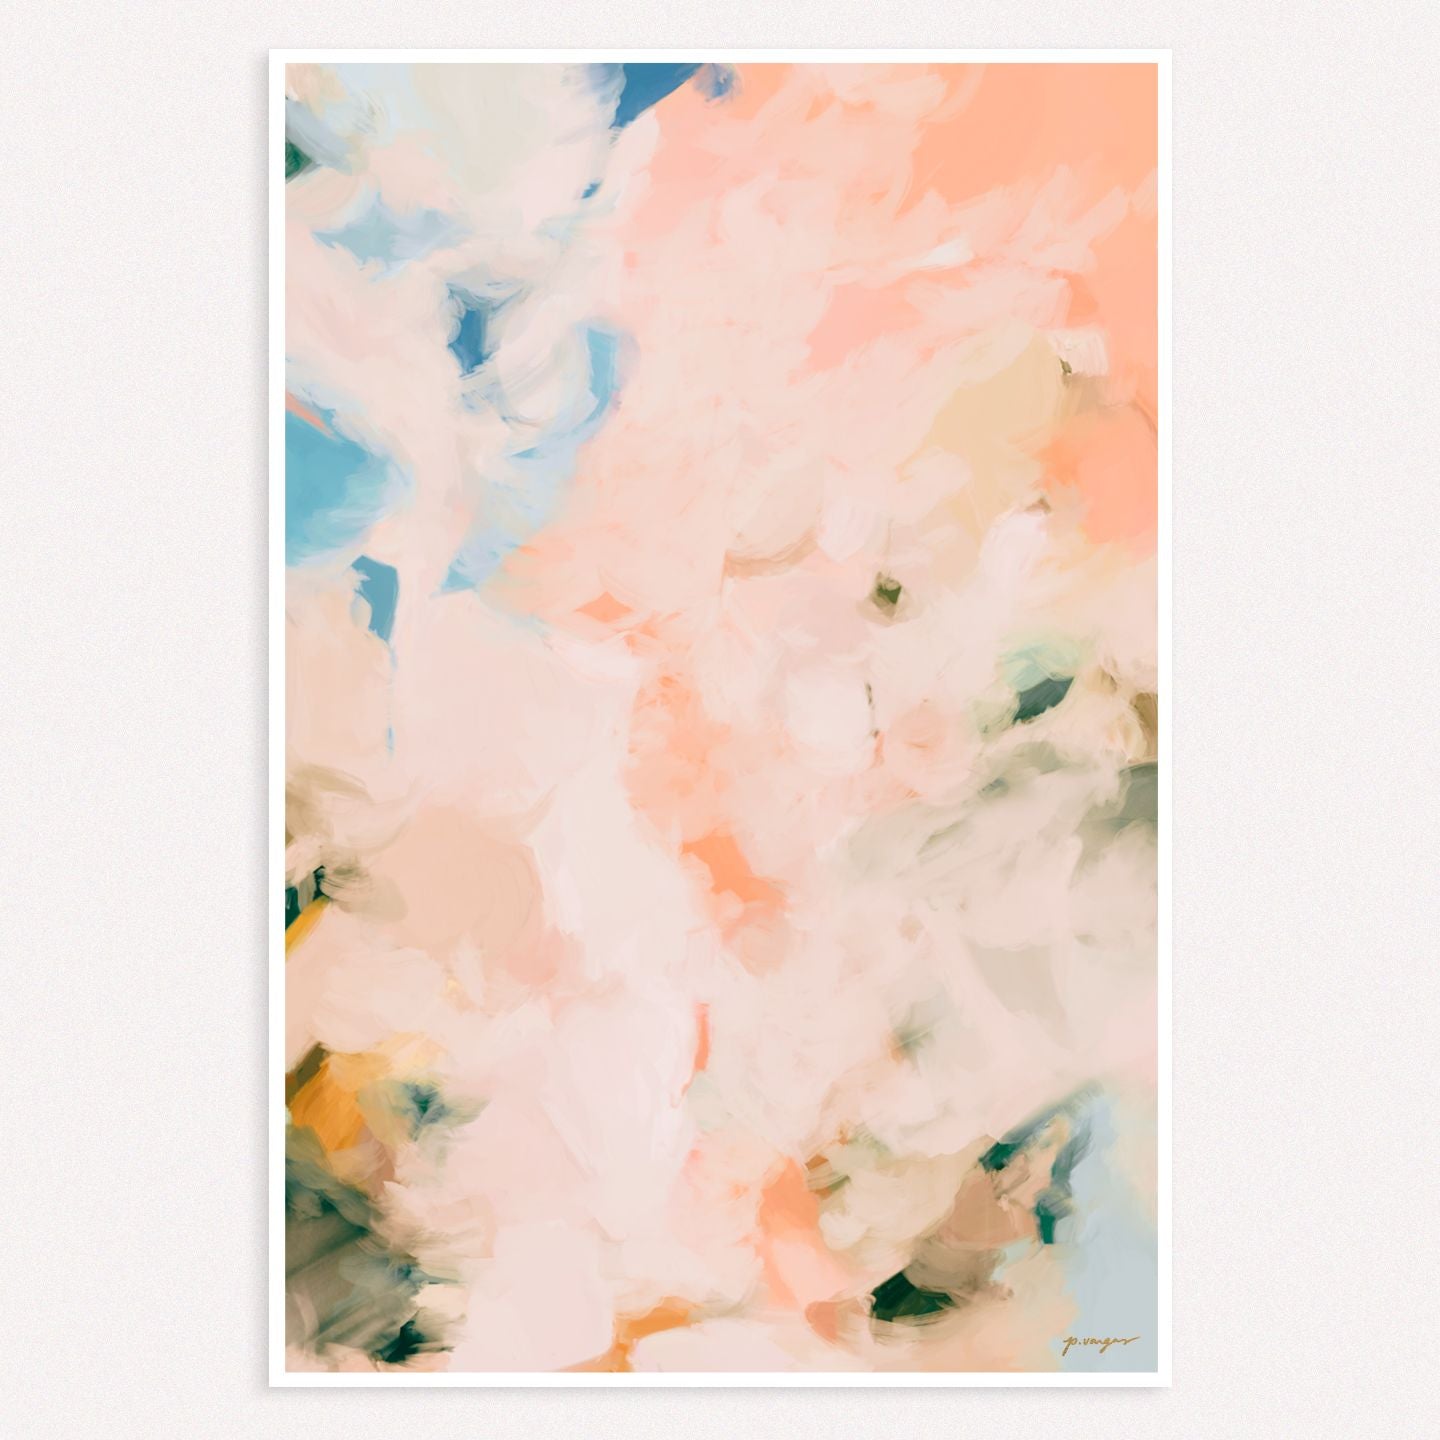 Peach Season, pink and blue colorful abstract wall art print by Parima Studio